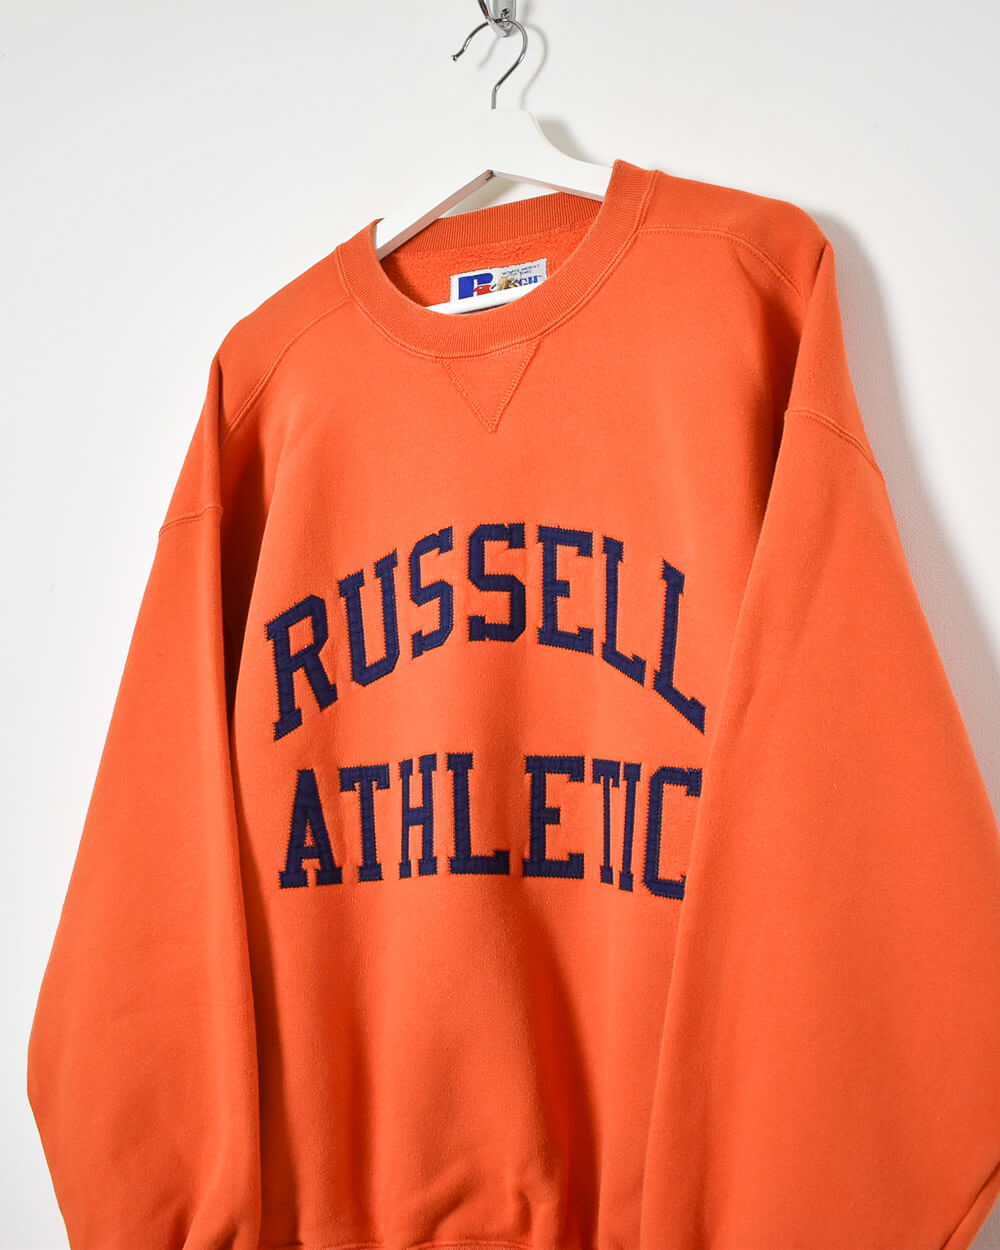 Russell Athletic Sweatshirt - Large - Domno Vintage 90s, 80s, 00s Retro and Vintage Clothing 